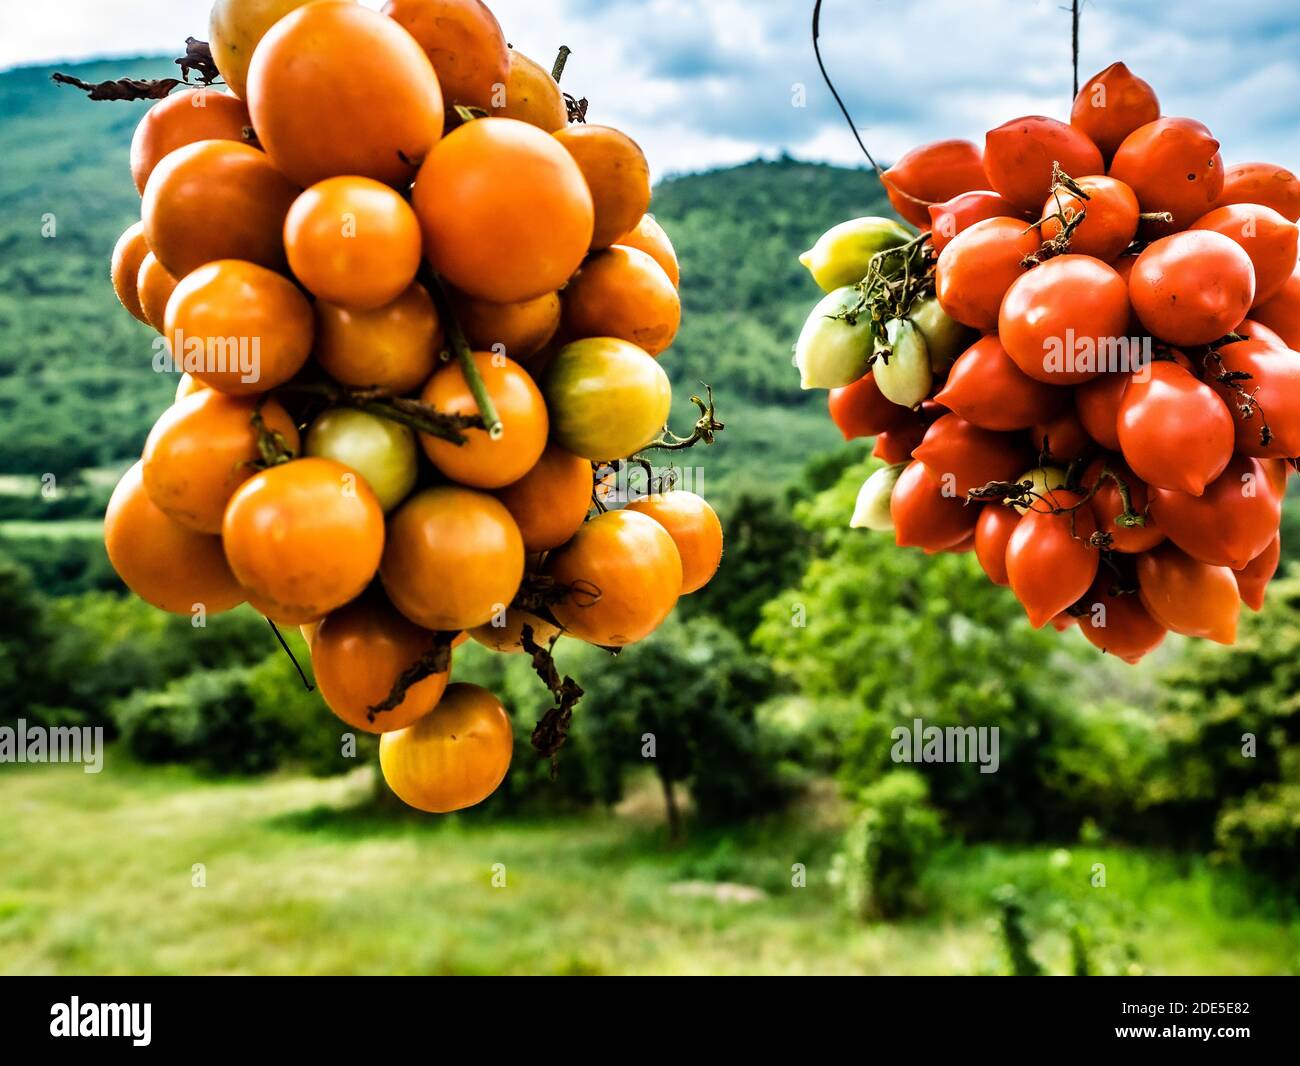 two types of yellow and red tomatoes, organized in clusters, taken up close in the open air in the green of nature Stock Photo